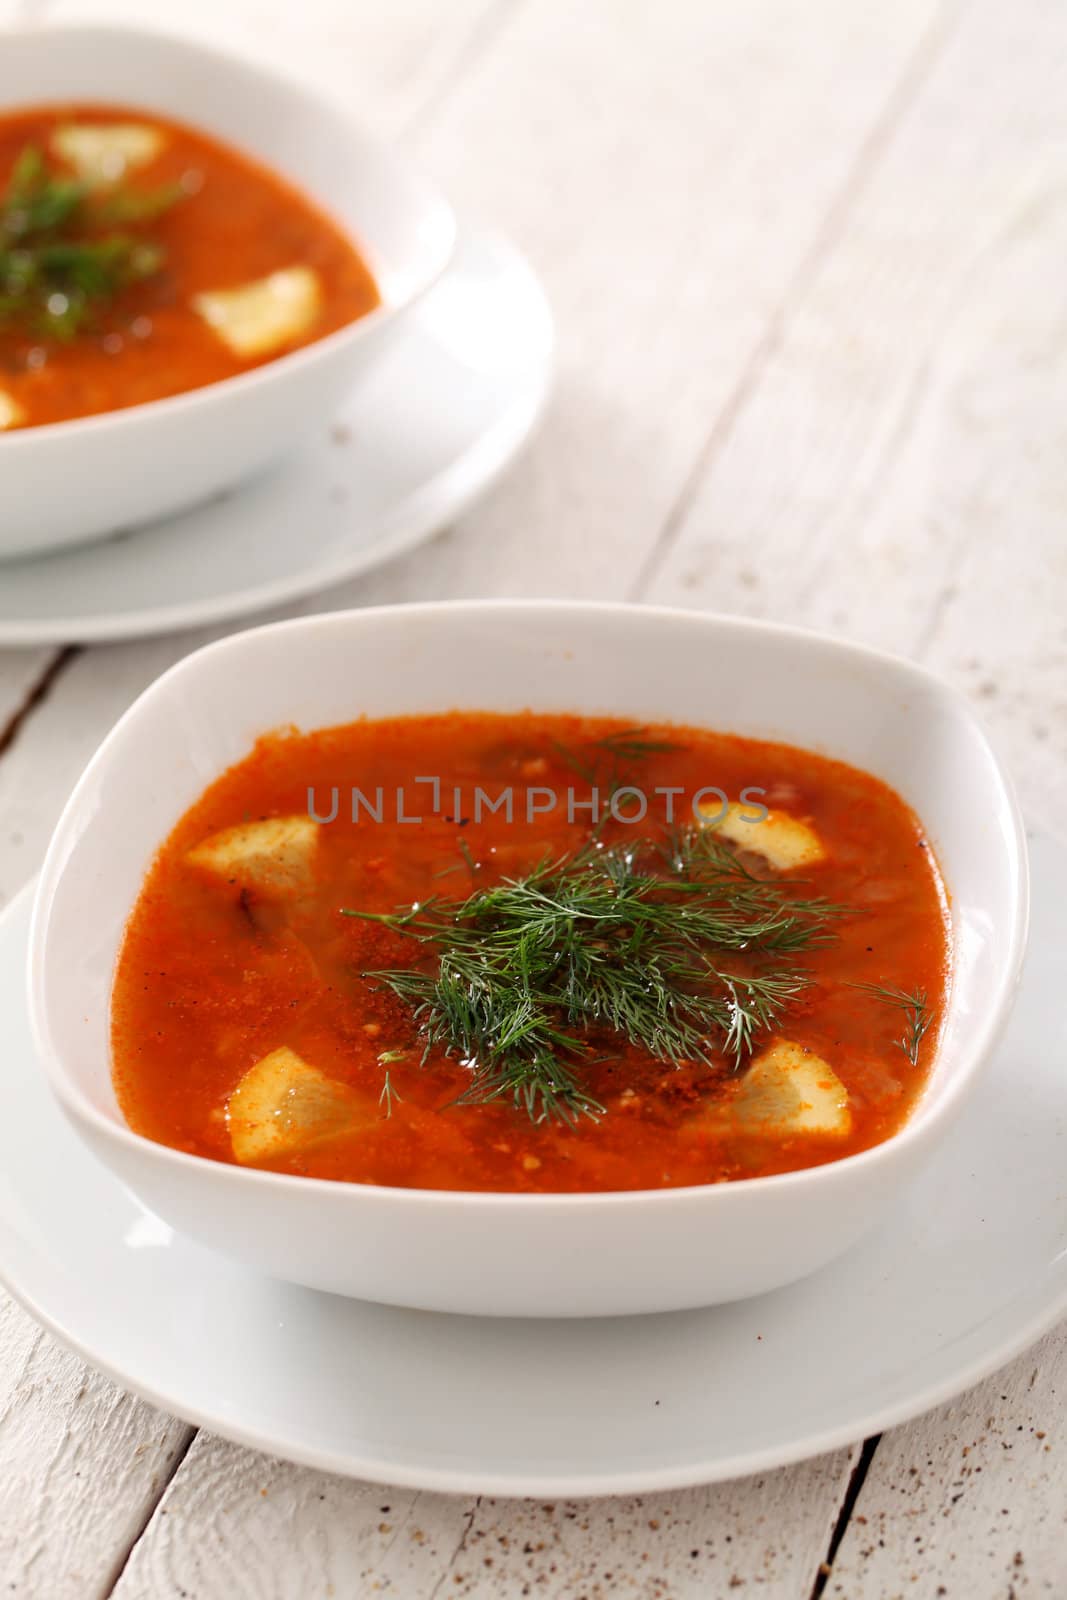 Image of two bowls of hot red soup isolated on white wooden table